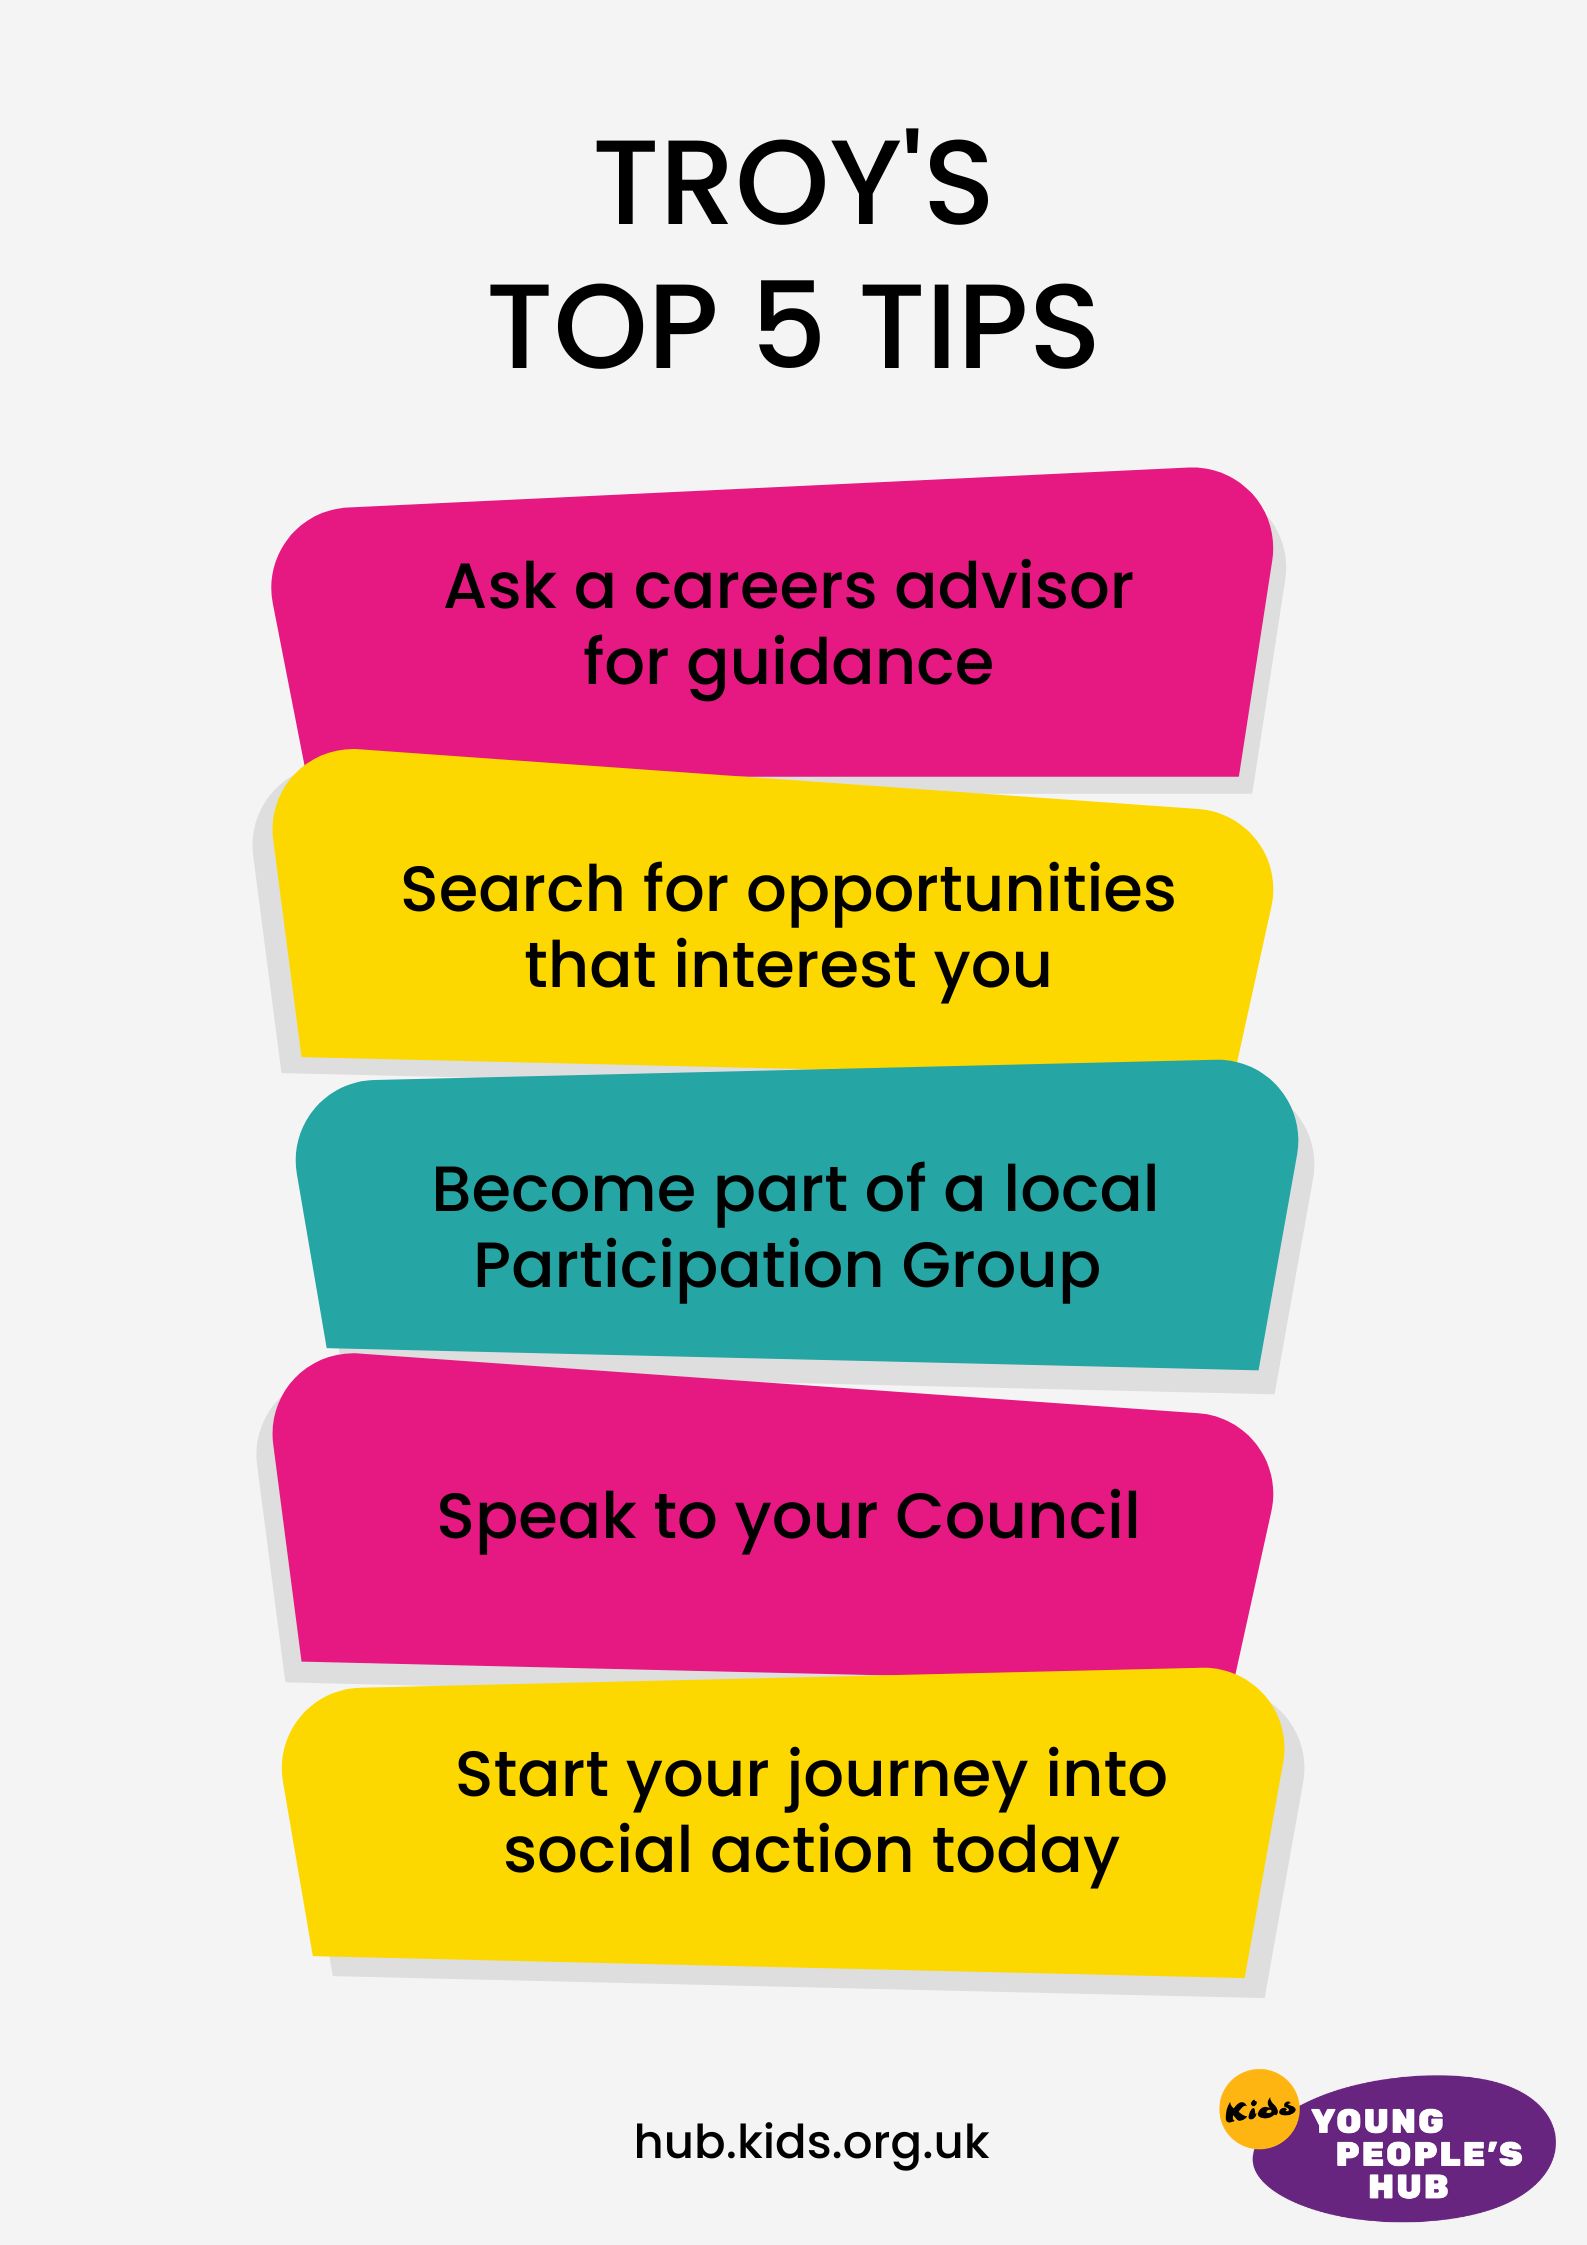 Troy's tips for Participation and getting involved